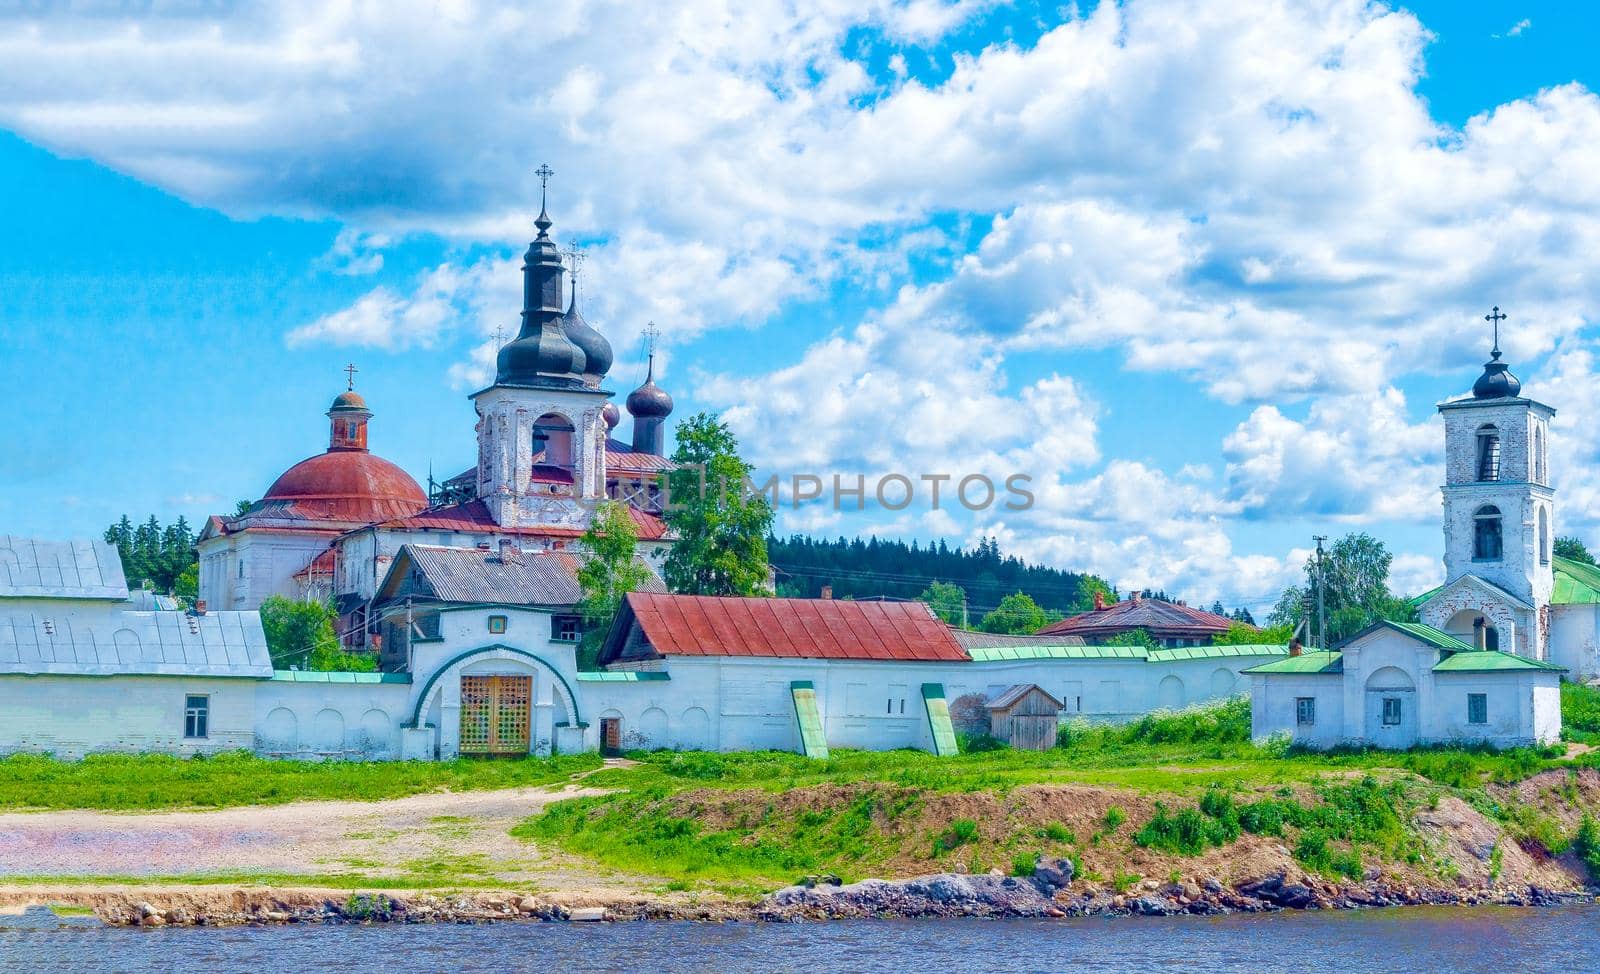 View from the river to the old Russian monastery. by kolesnikov_studio